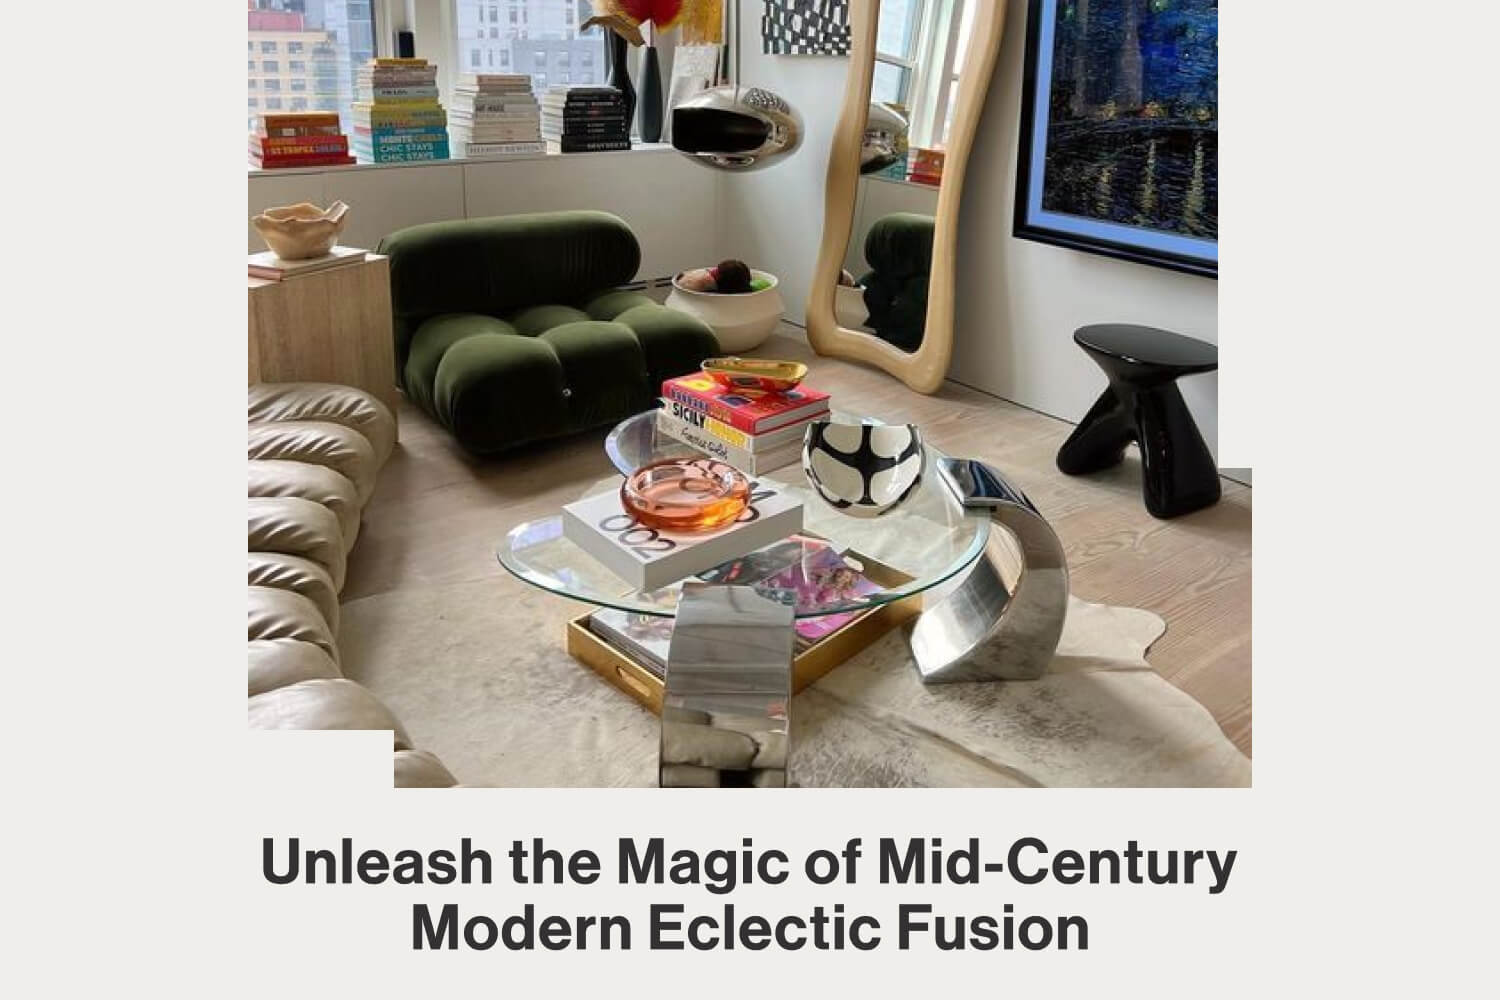 Unleash the Magic of Mid-Century Modern Eclectic Fusion